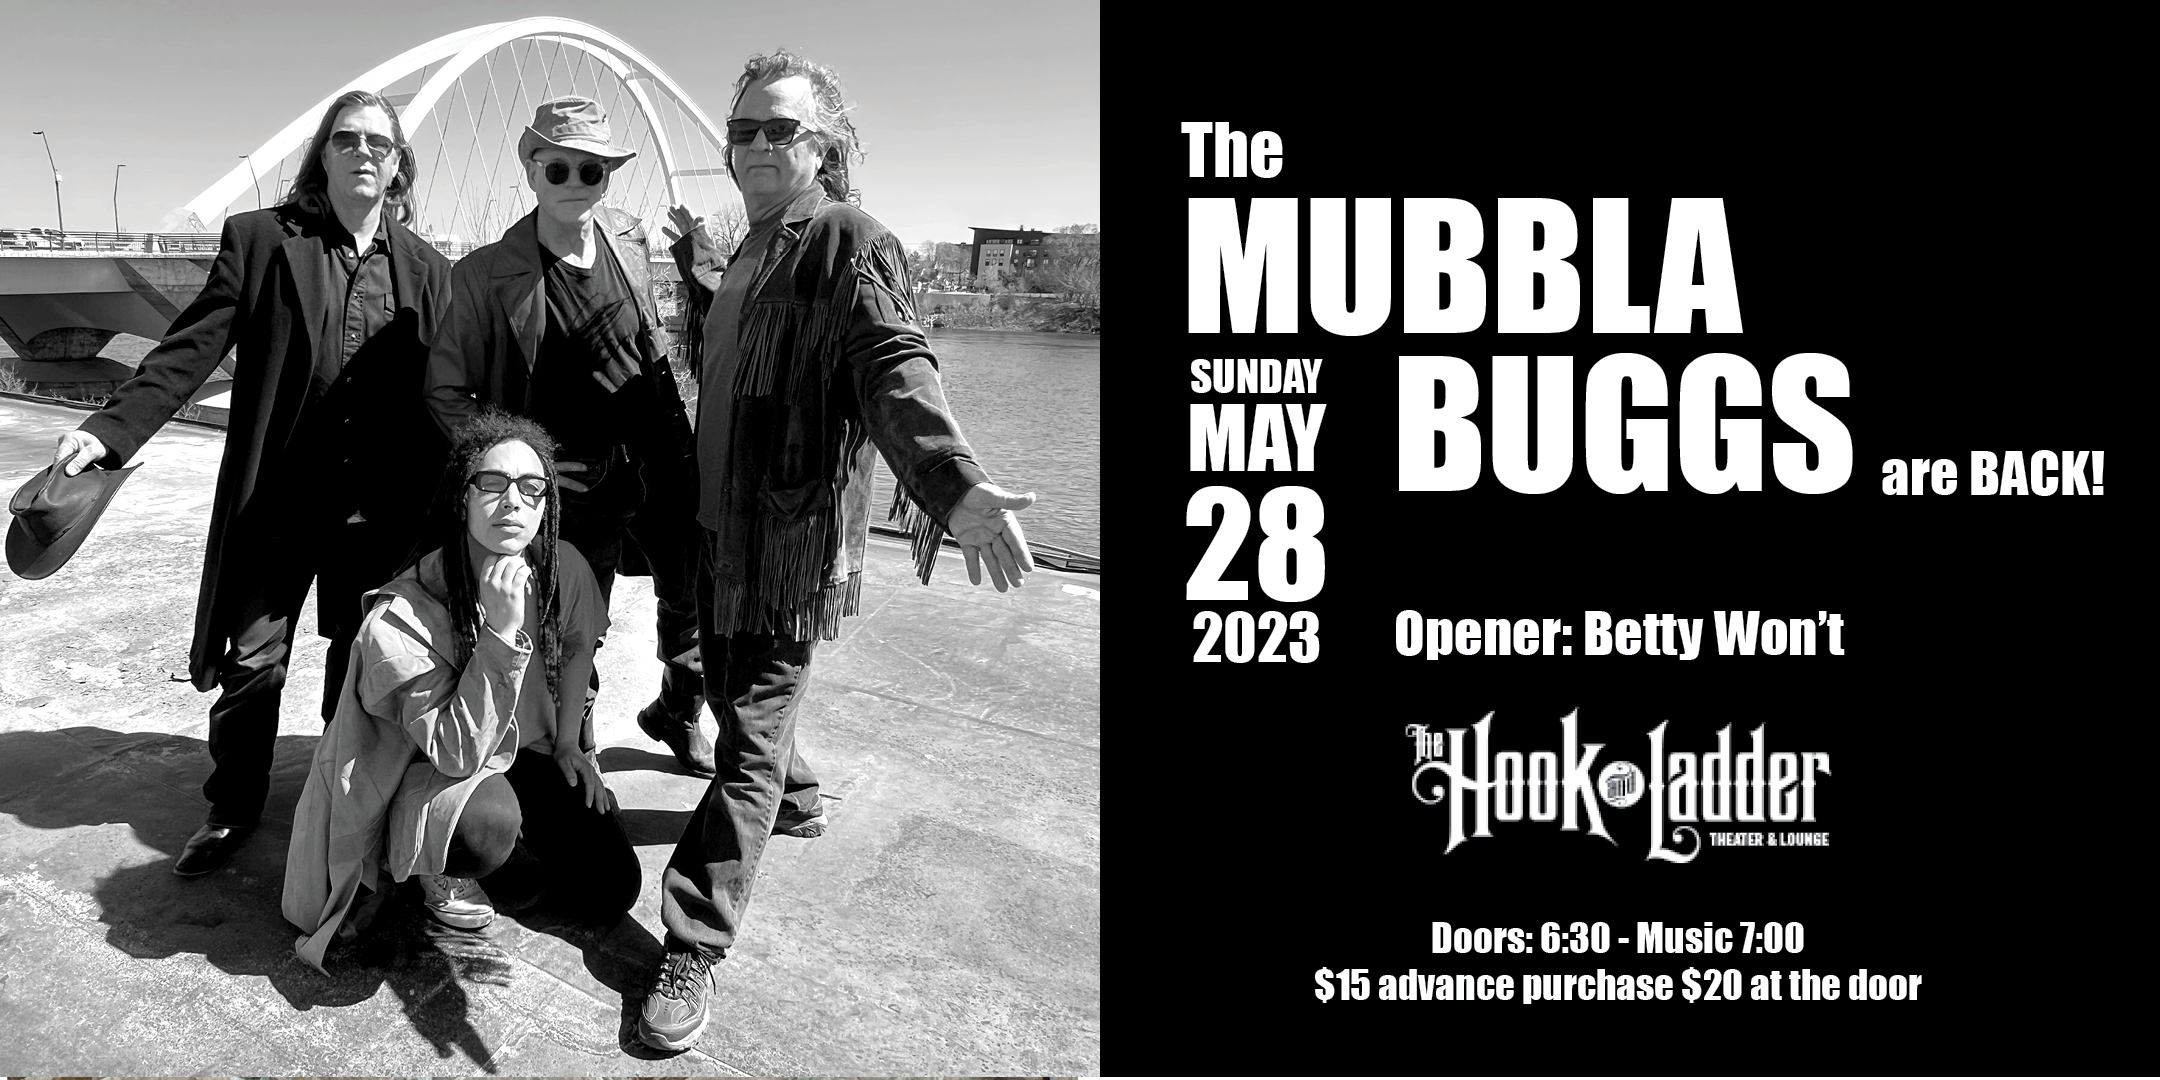 Mubbla Buggs Video Release Party + Betty Won’t Sunday, May 28, 2023 The Hook and Ladder Theater Doors 6:30pm :: Music 7:00pm :: 21+ General Admission: $15 ADV / $20 DOS